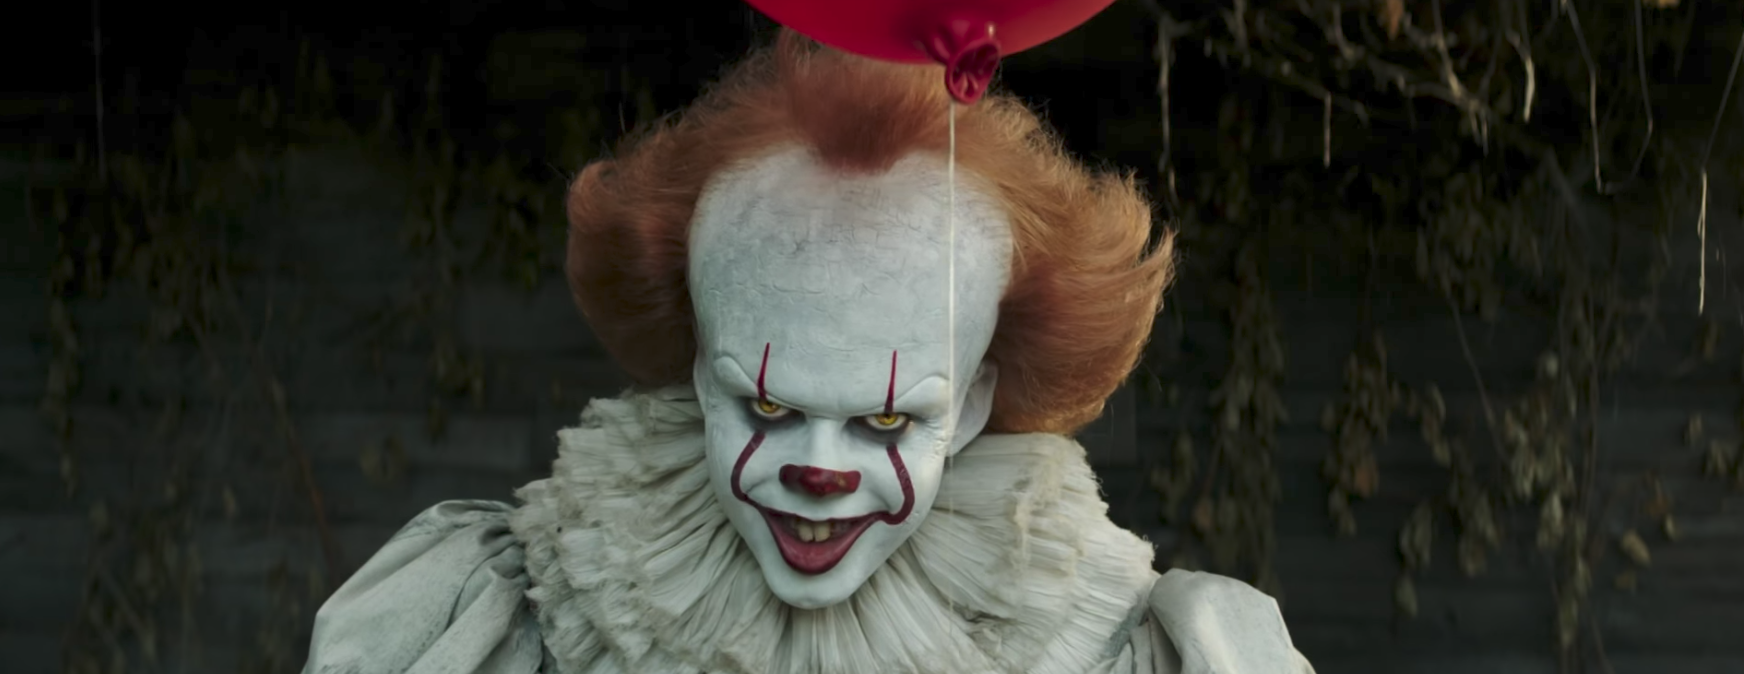 IT new TV spot Pennywise wants to know where you’re going - SciFiNow ...